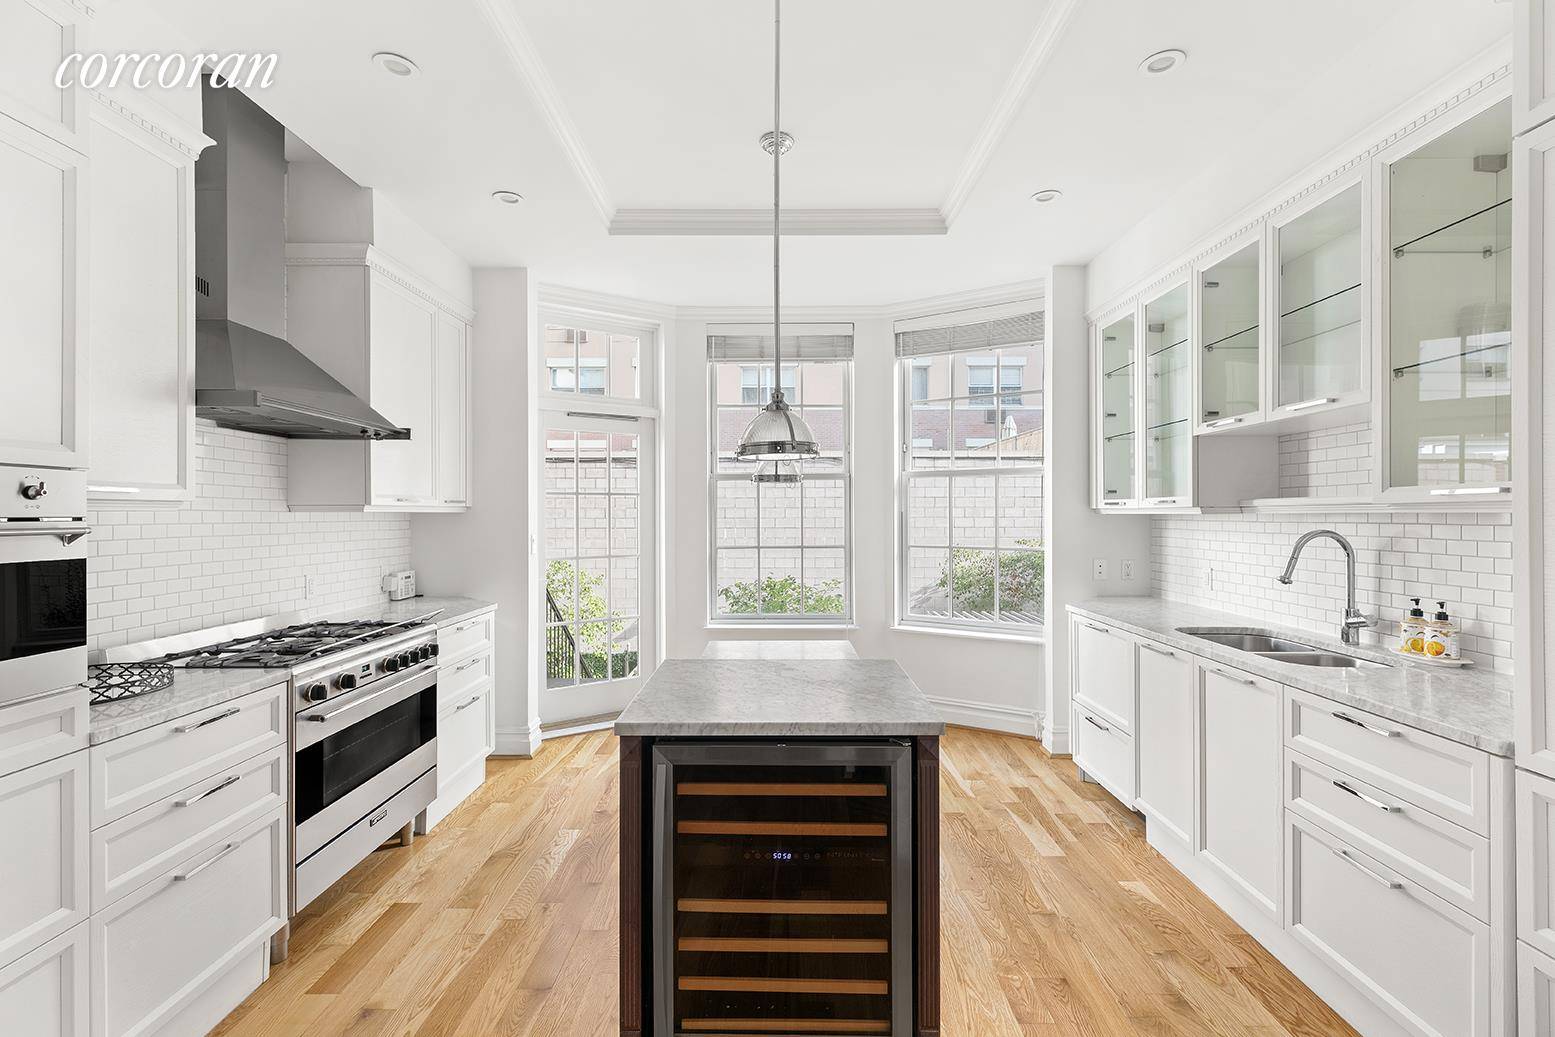 You really can have it all in charming brownstone Brooklyn.